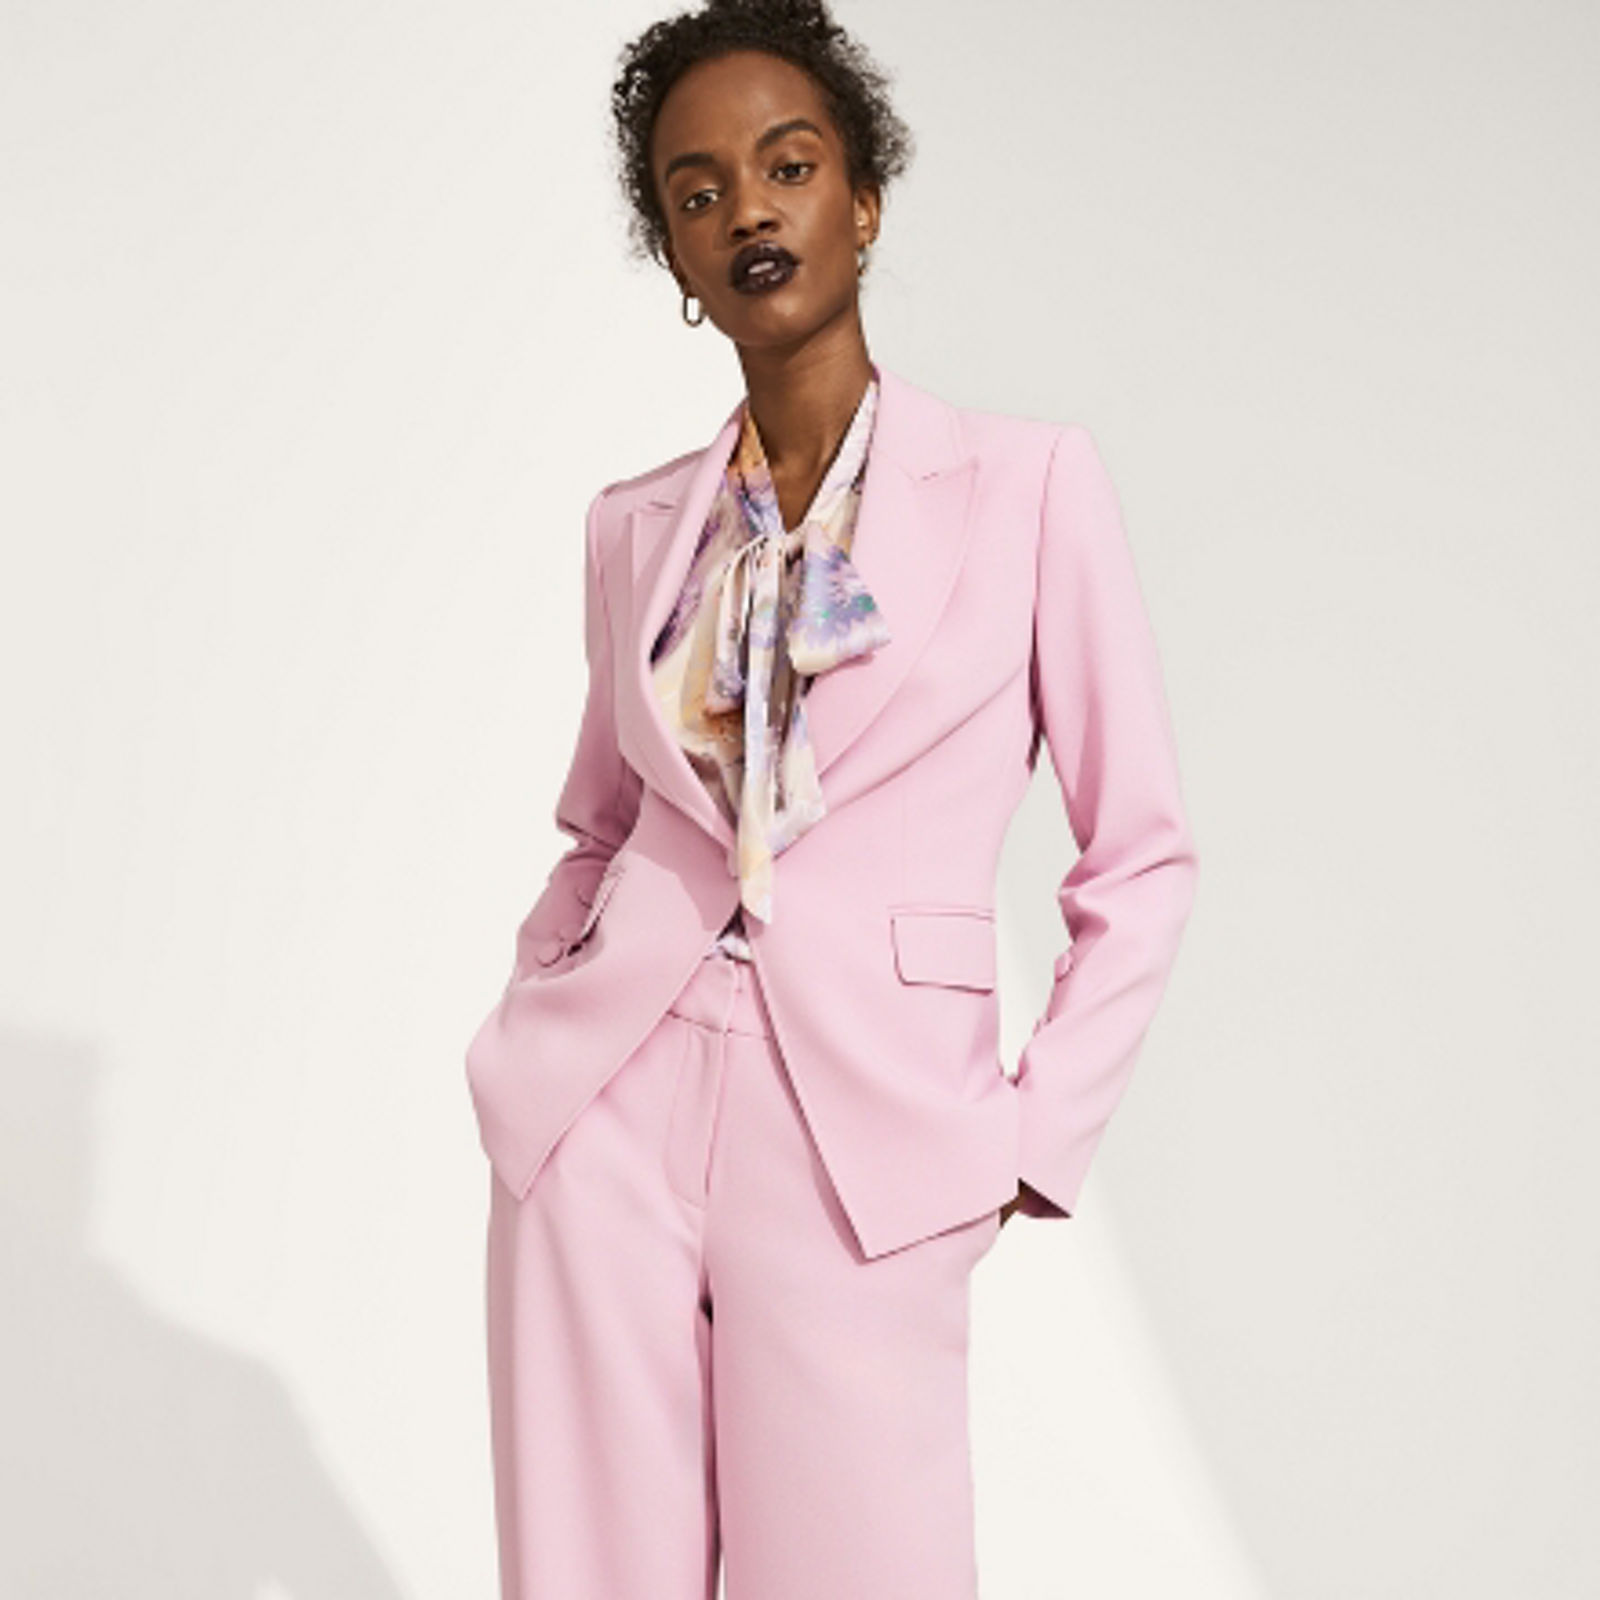 Dress Suits and Suit Separates - Macy's